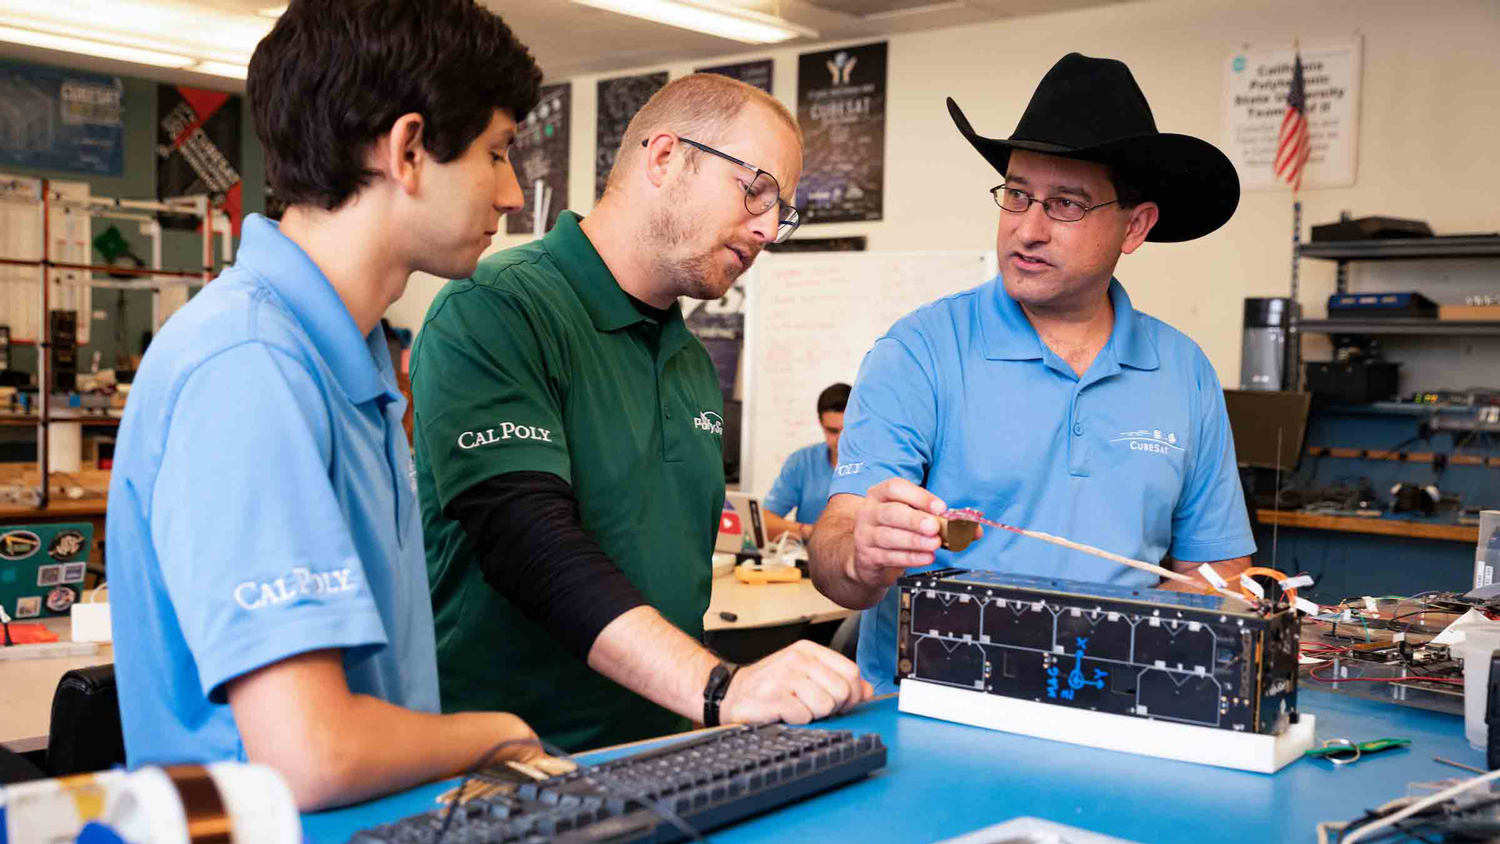 Three men, two in blue polo shirts and one in a green polo shirt, talk as they look at a CubeSat on the table in front of them.